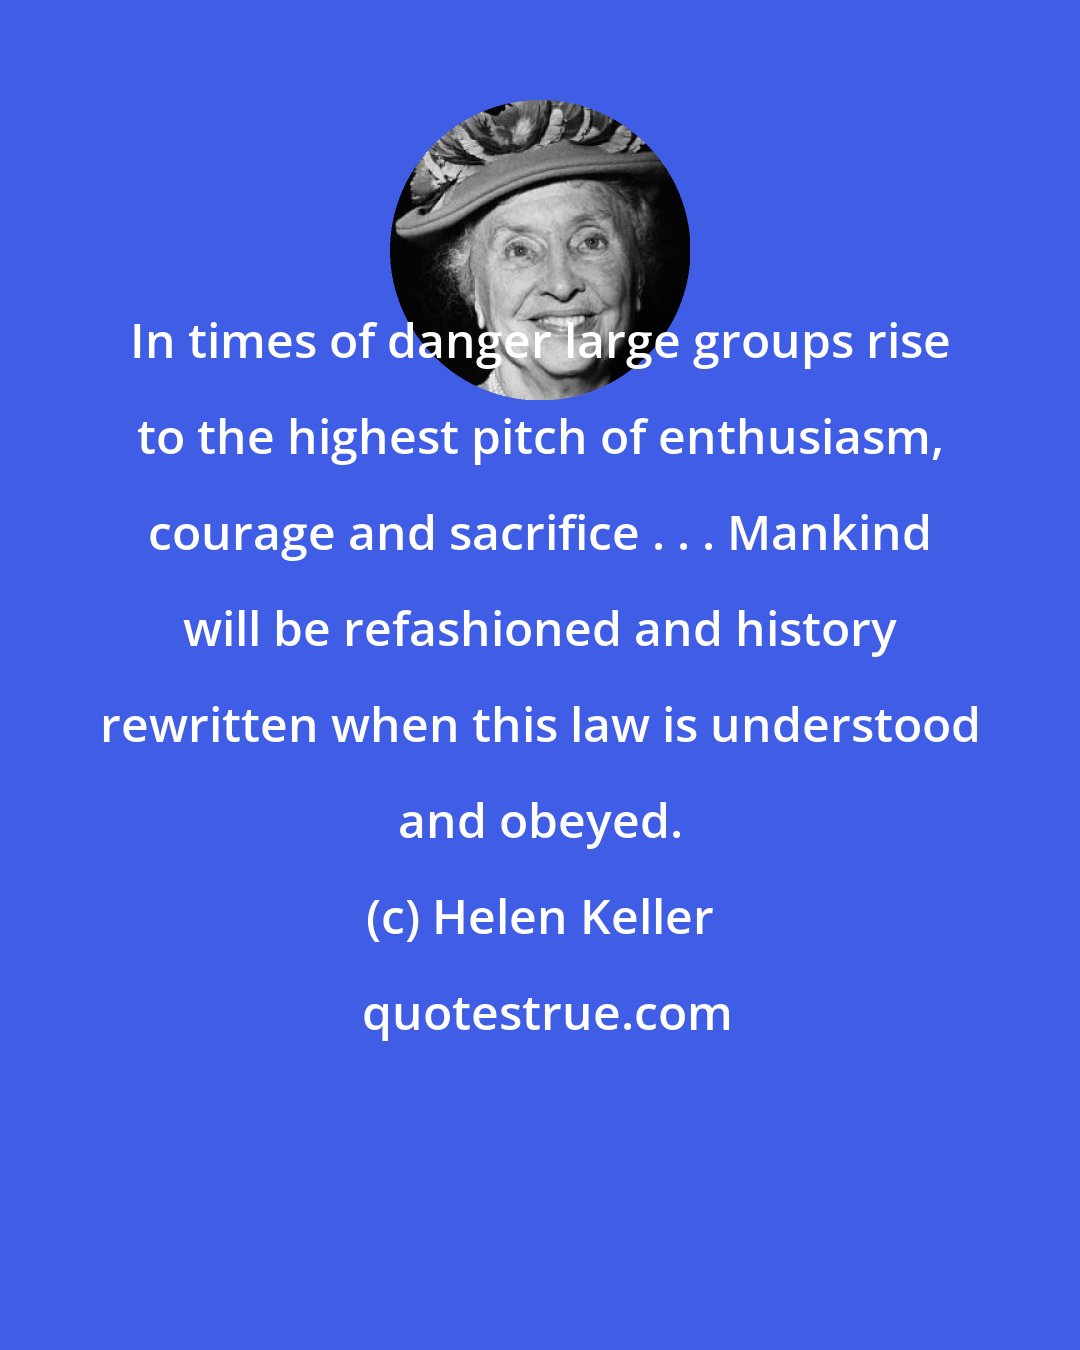 Helen Keller: In times of danger large groups rise to the highest pitch of enthusiasm, courage and sacrifice . . . Mankind will be refashioned and history rewritten when this law is understood and obeyed.